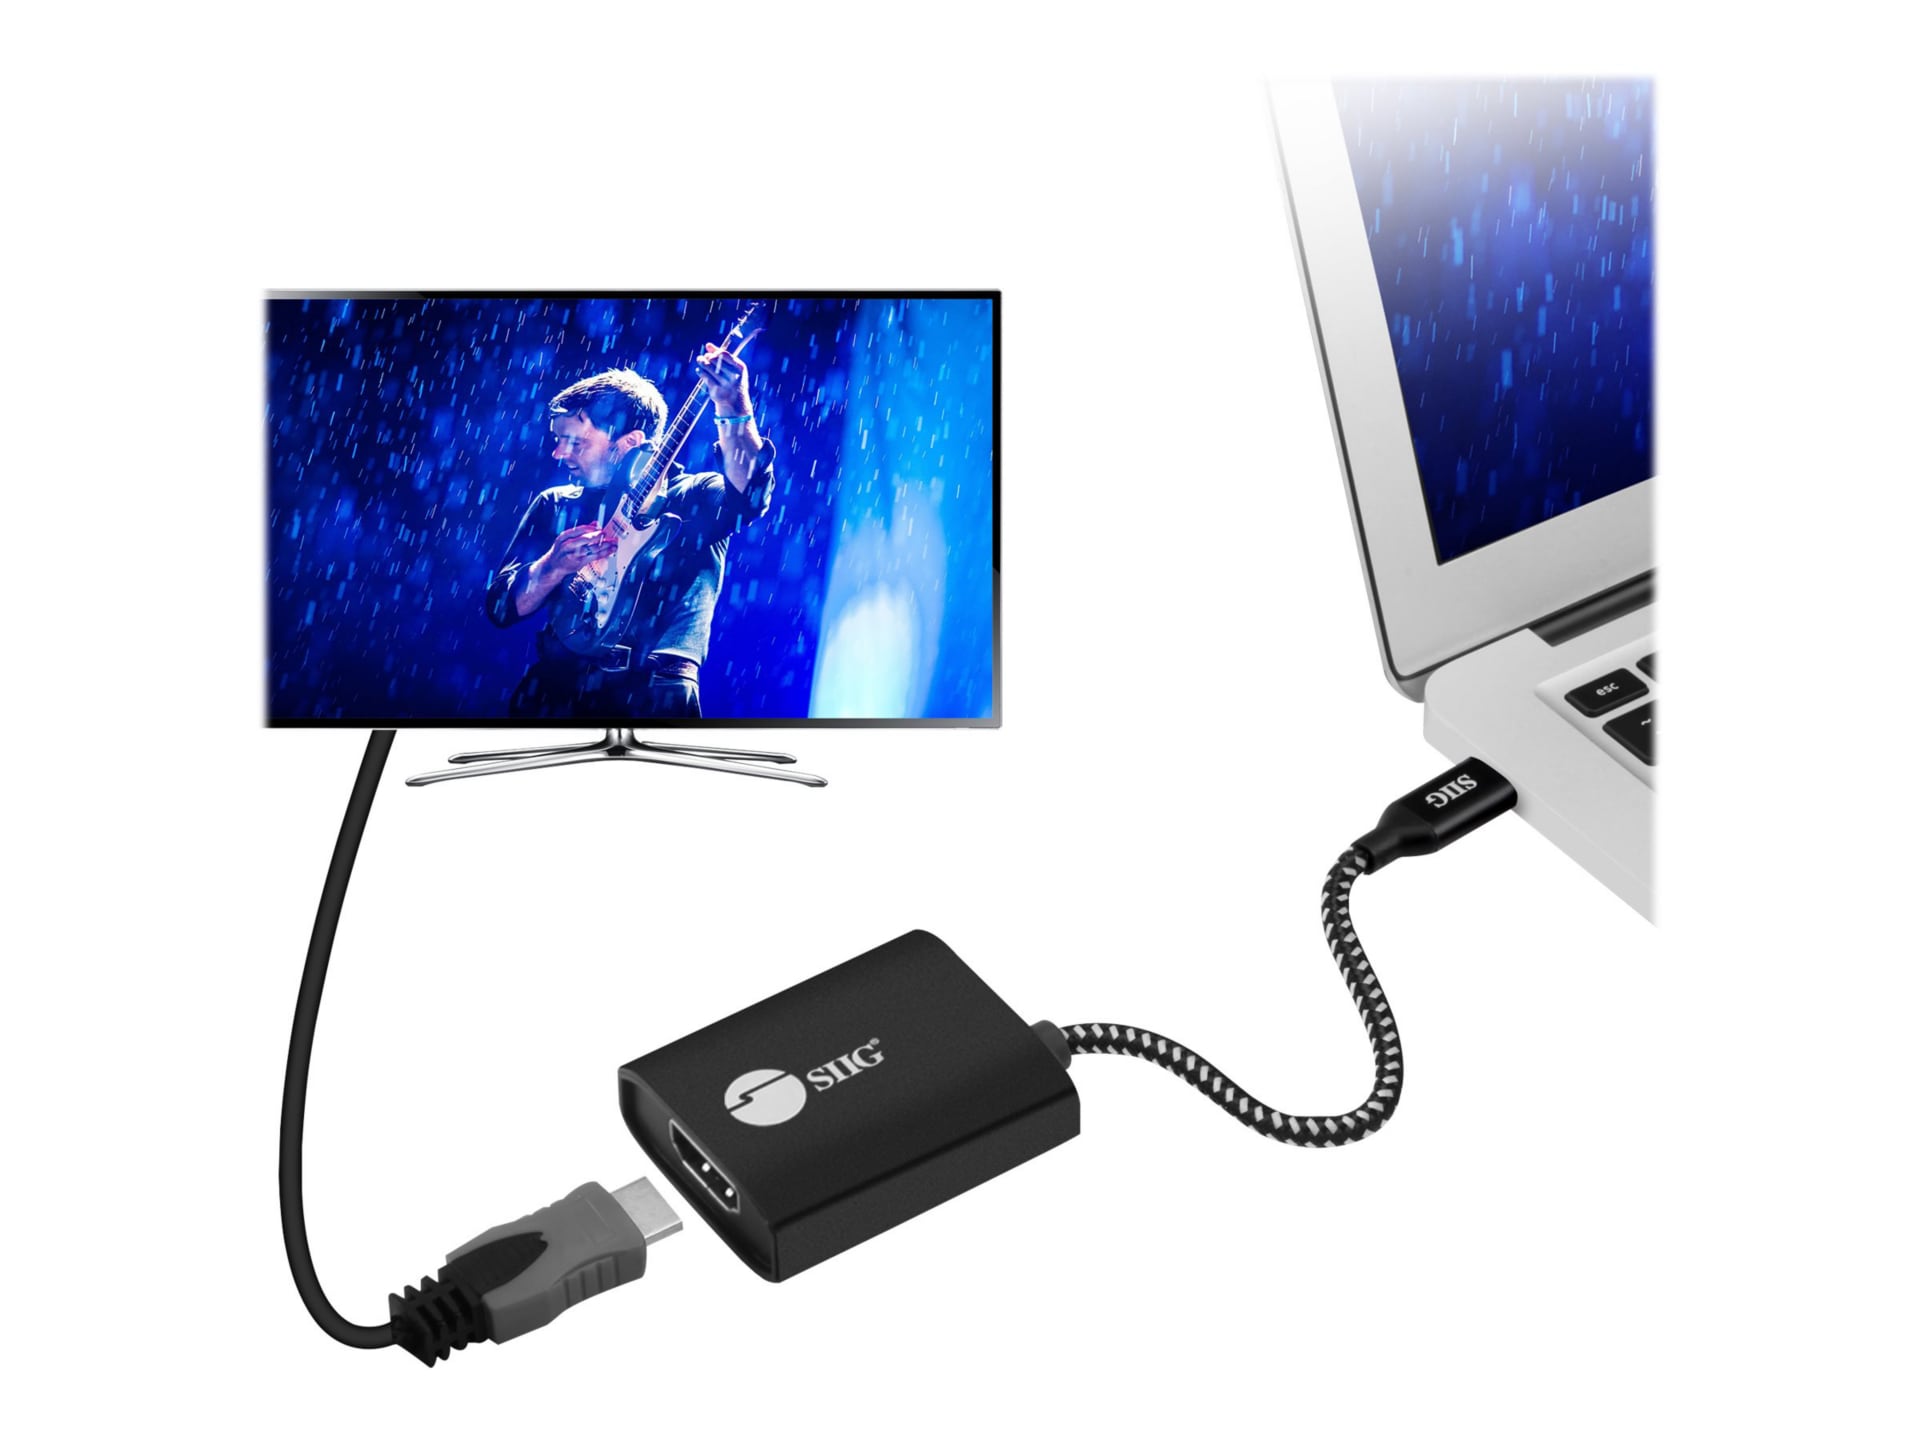 SIIG USB Type-C to HDMI Video Cable Adapter with PD Charging - docking station - USB-C / Thunderbolt 3 - HDMI